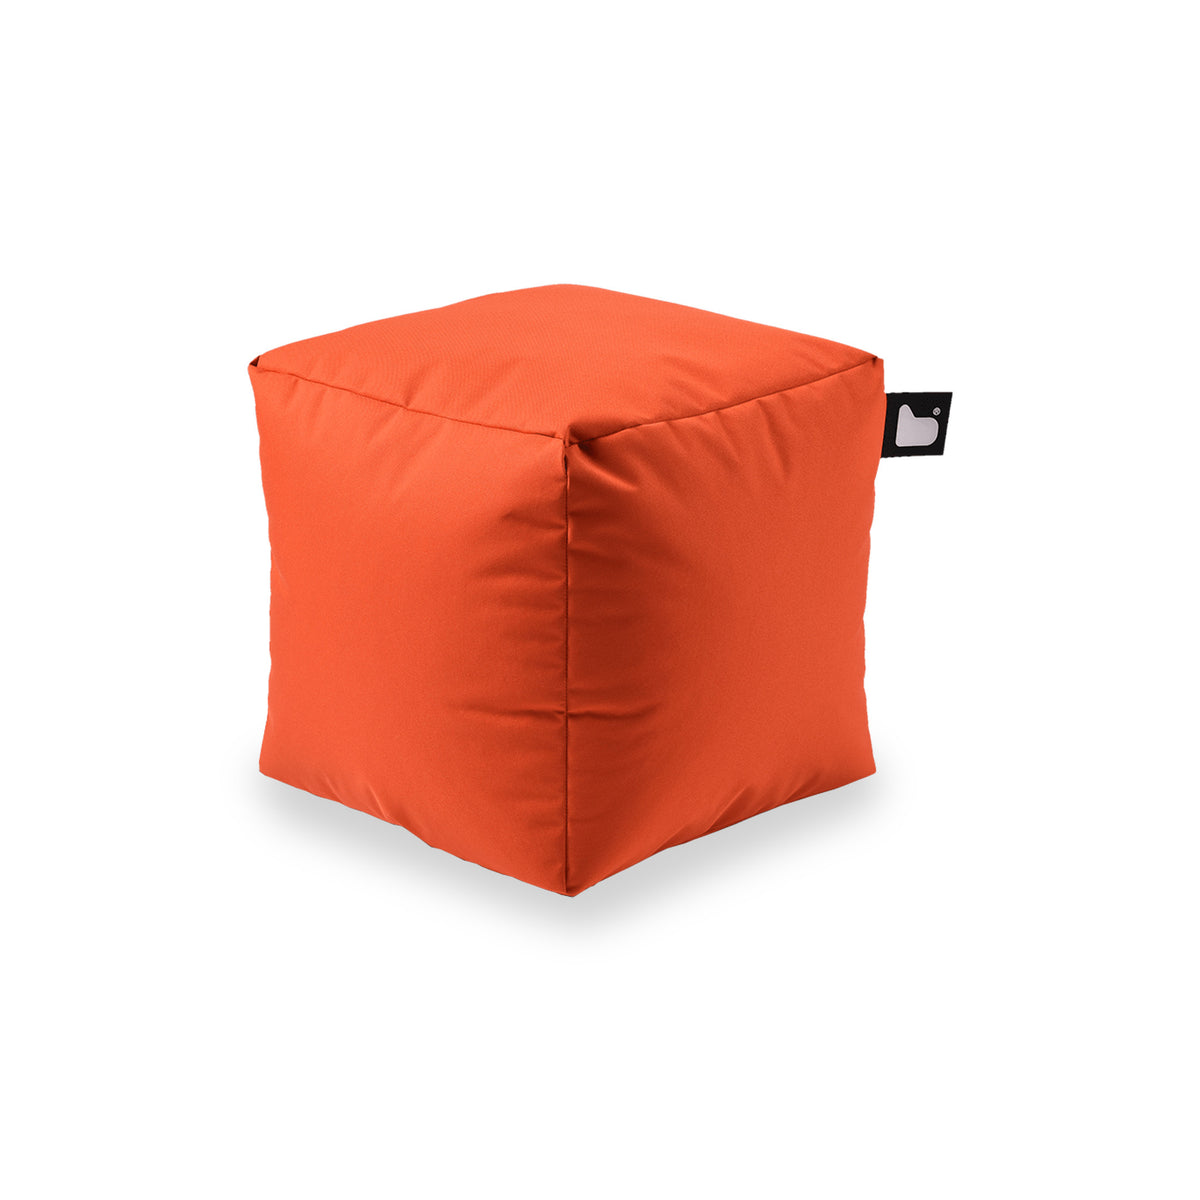 Outdoor B Box in Orange from Roseland Furniture